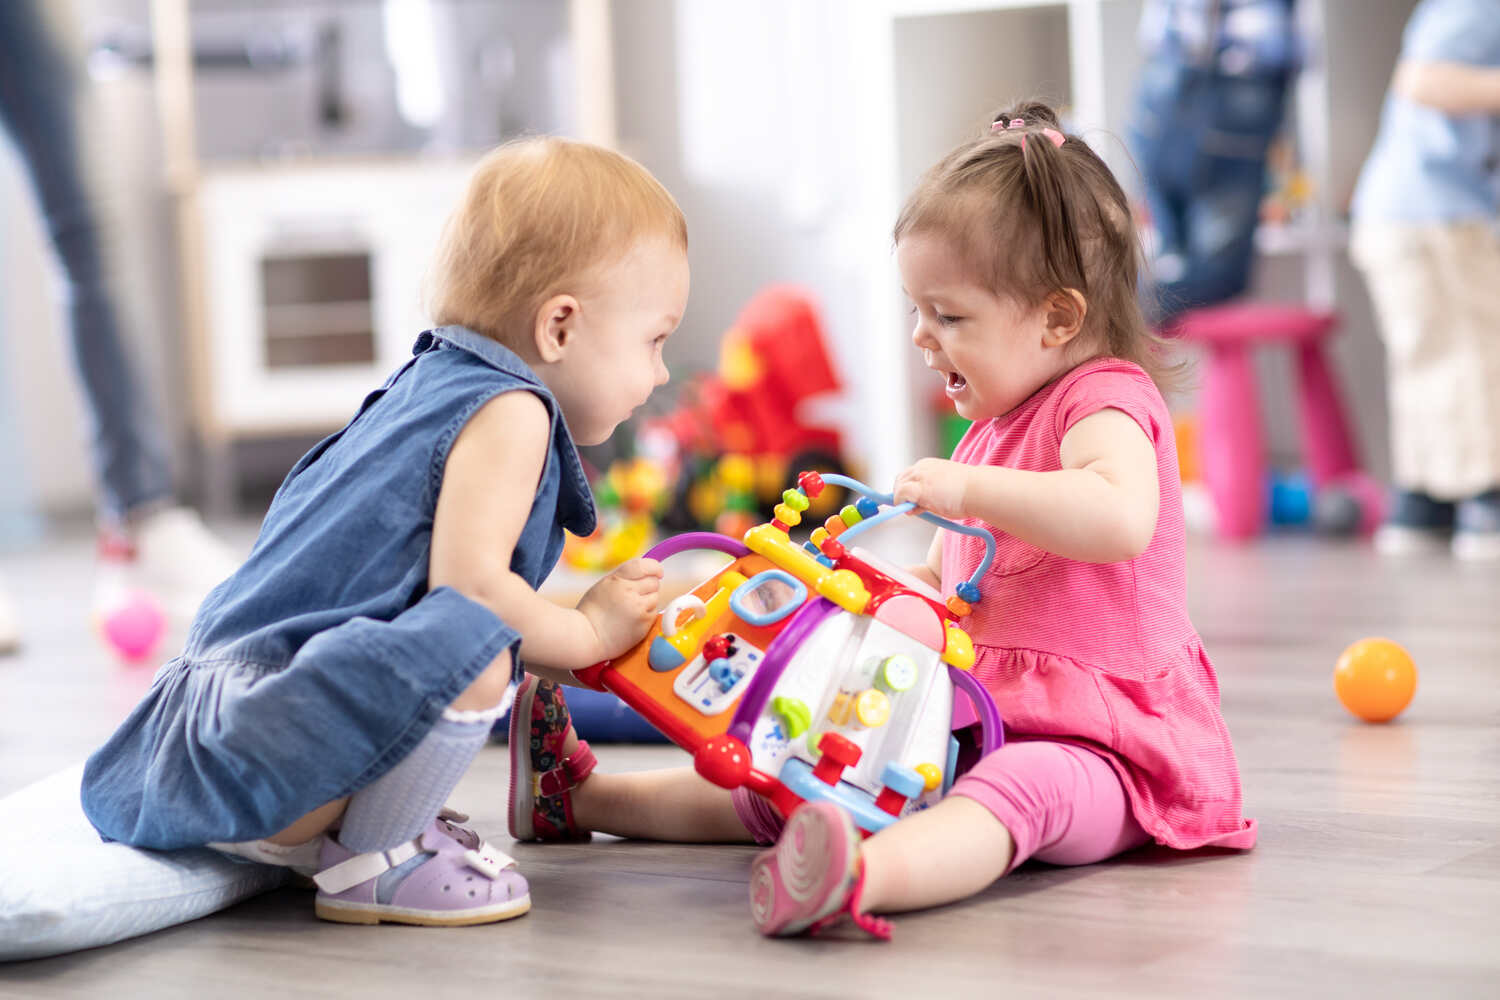 Let your toddler deal with minor squabbles on their own